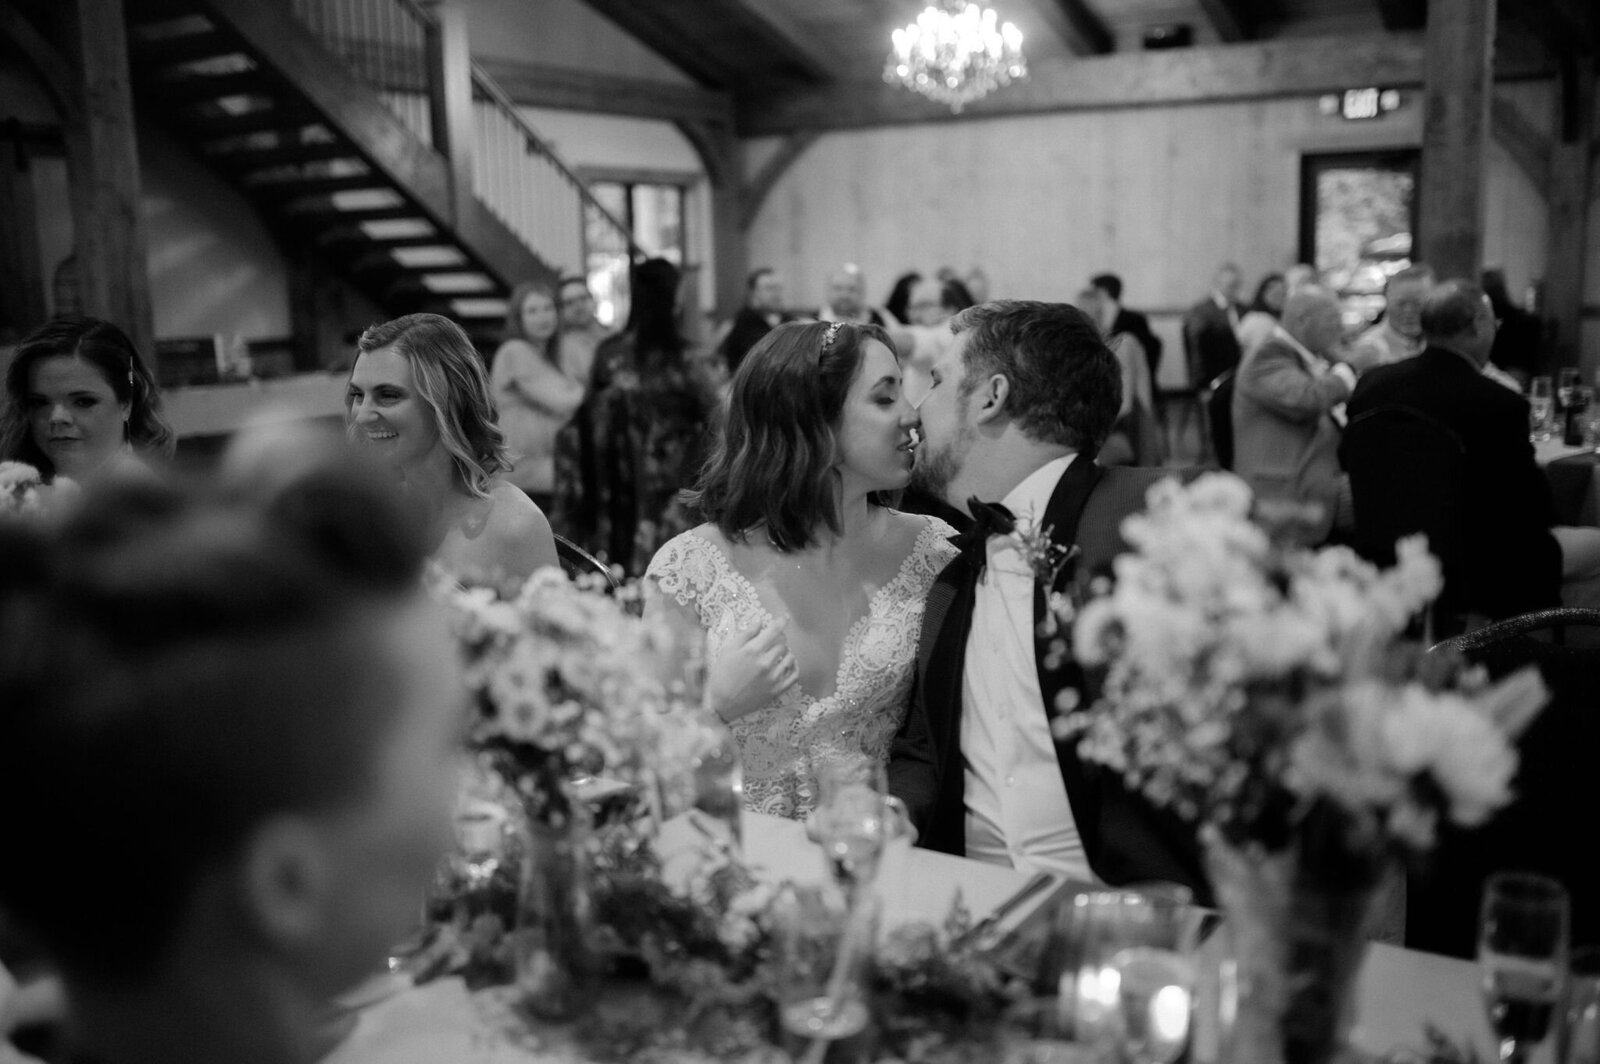 bride and groom sitting at table kissing at wedding reception, guests clapping